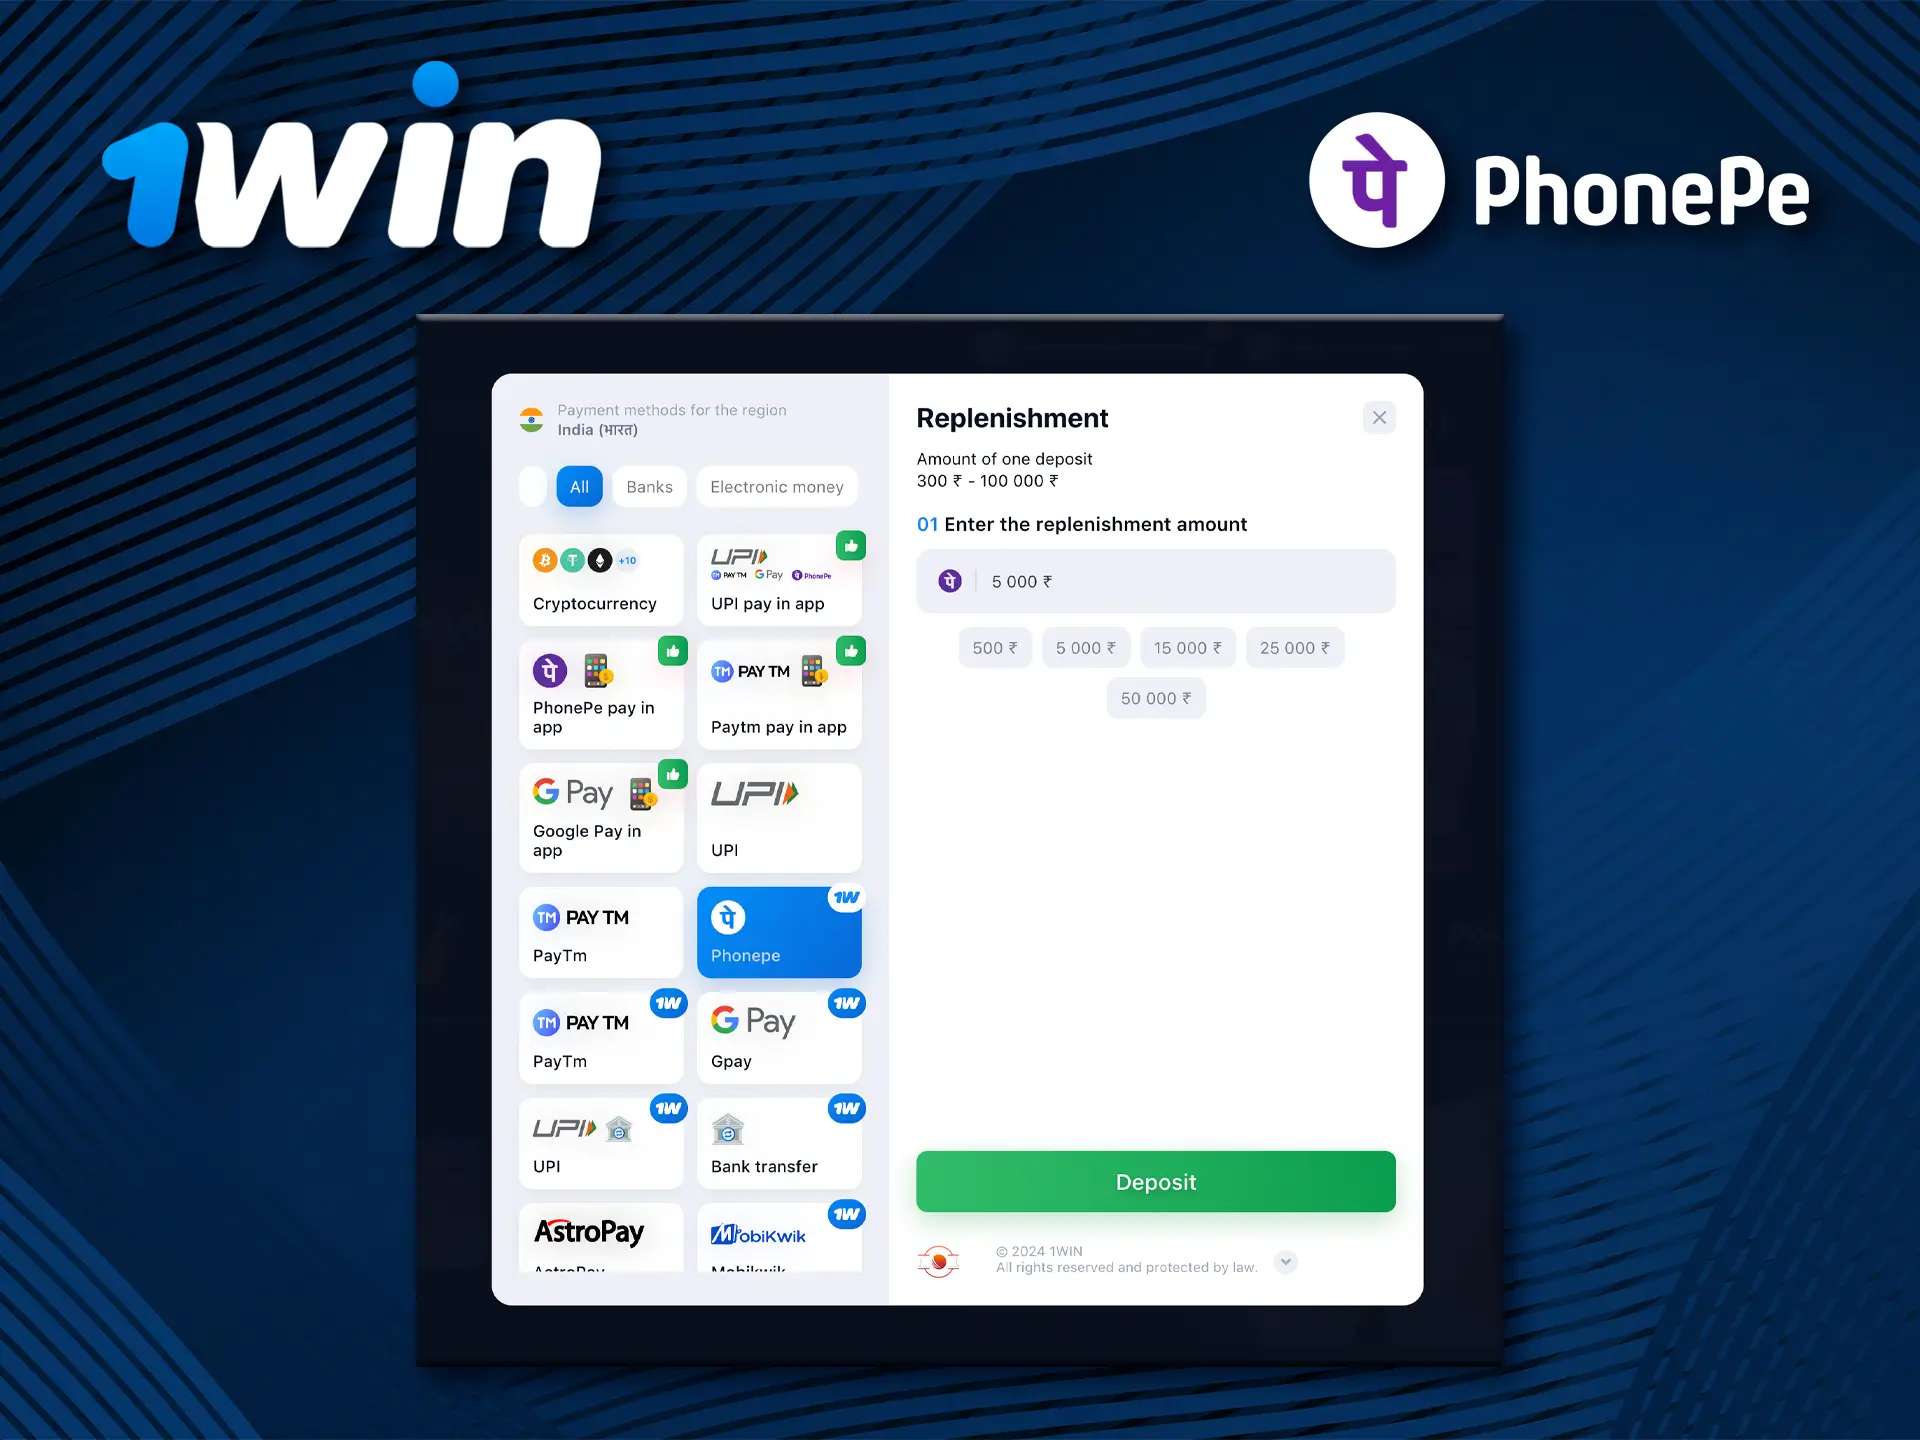 1Win is known for its wide range of deposit and withdrawal methods including PhonePe.